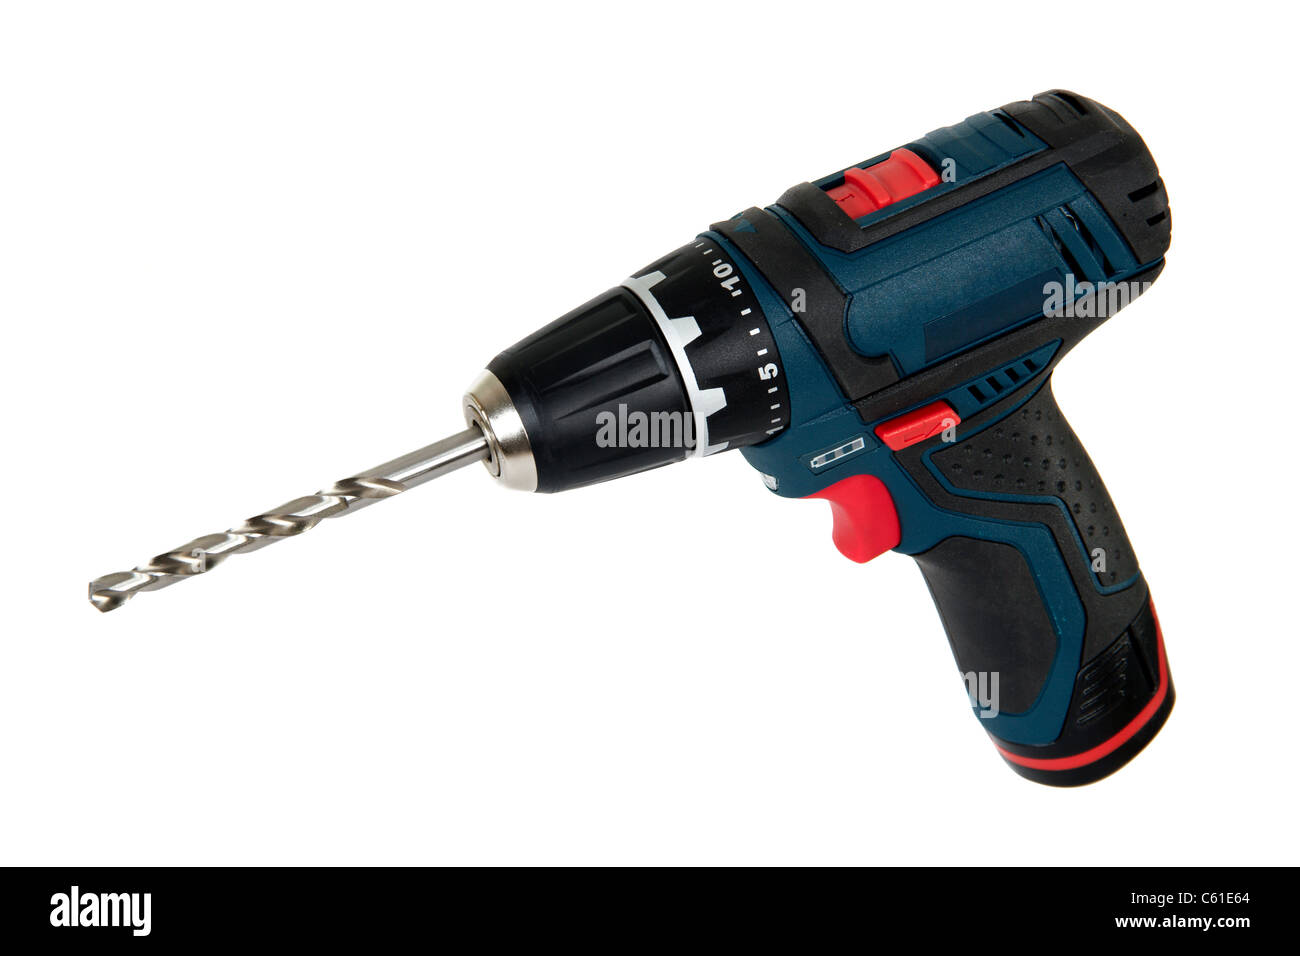 https://c8.alamy.com/comp/C61E64/cordless-power-tools-isolated-on-a-white-background-C61E64.jpg